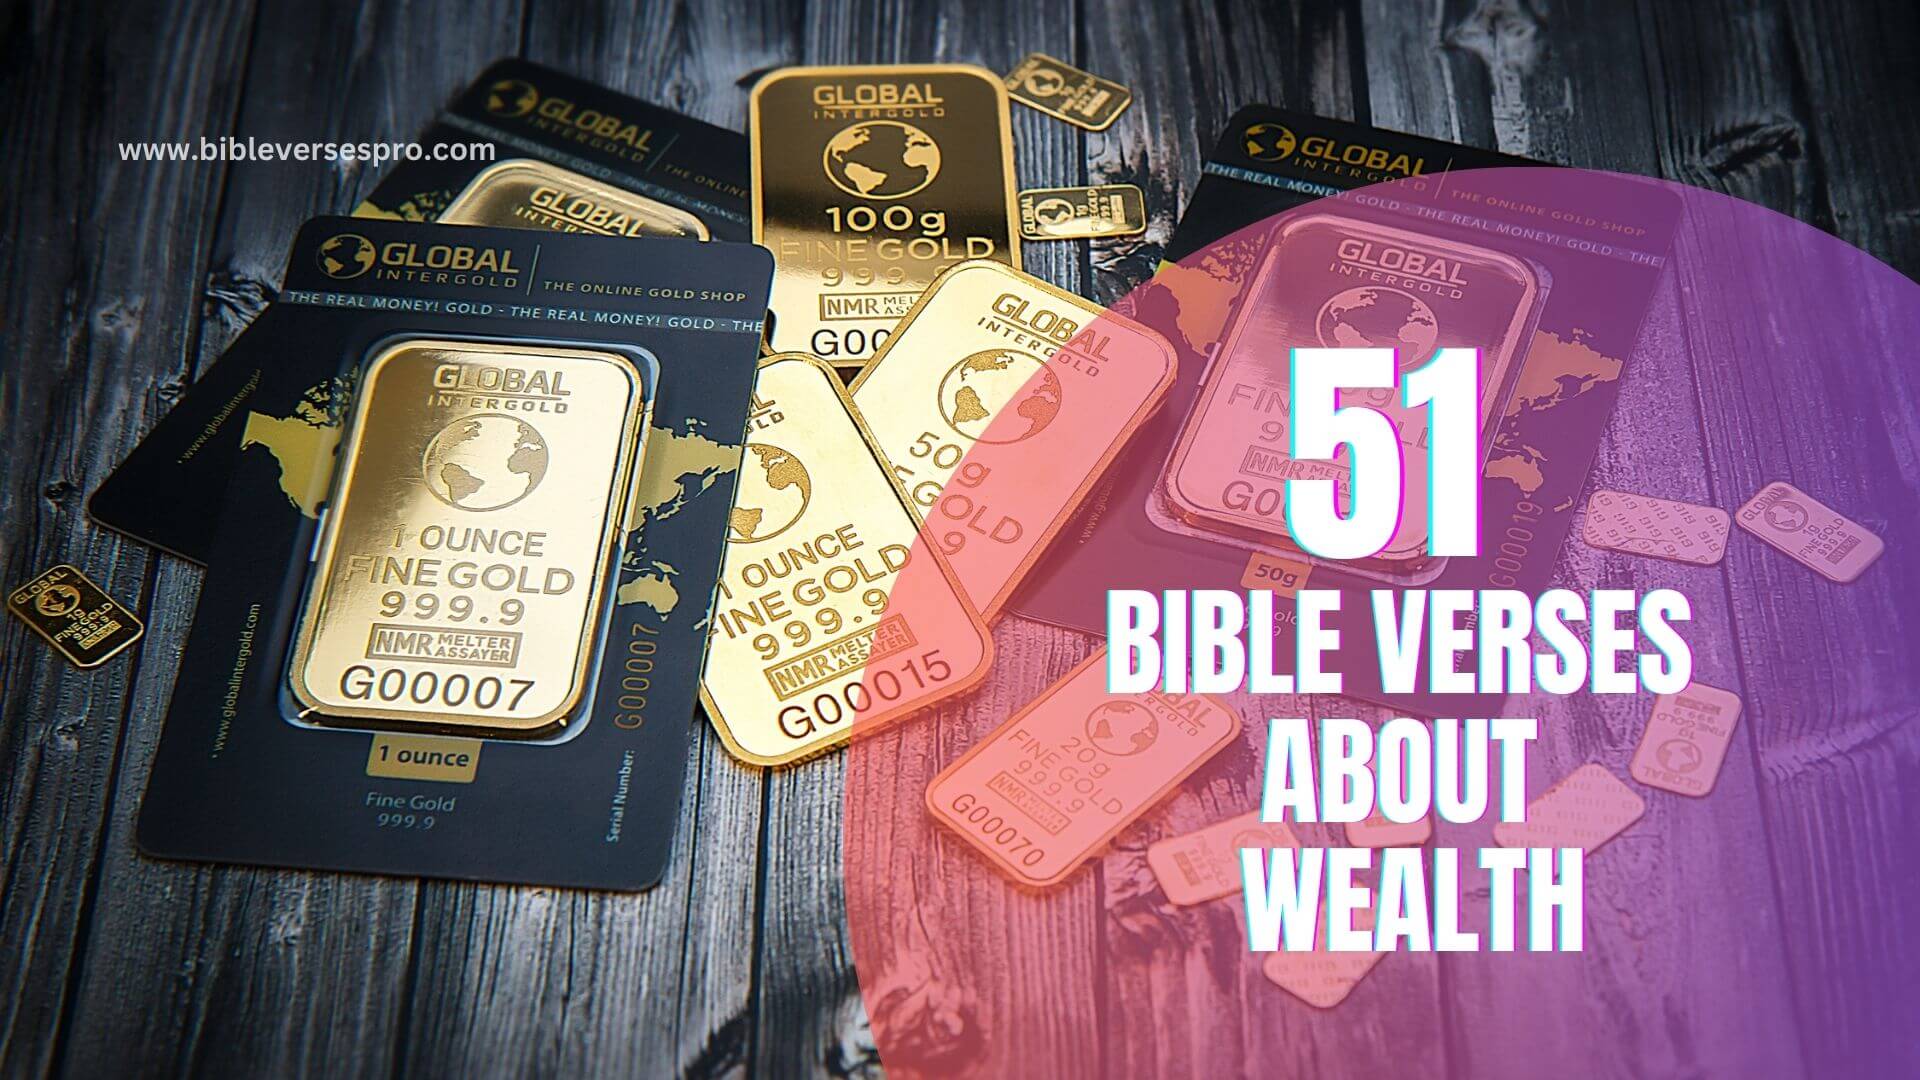 BIBLE VERSES ABOUT WEALTH (1)